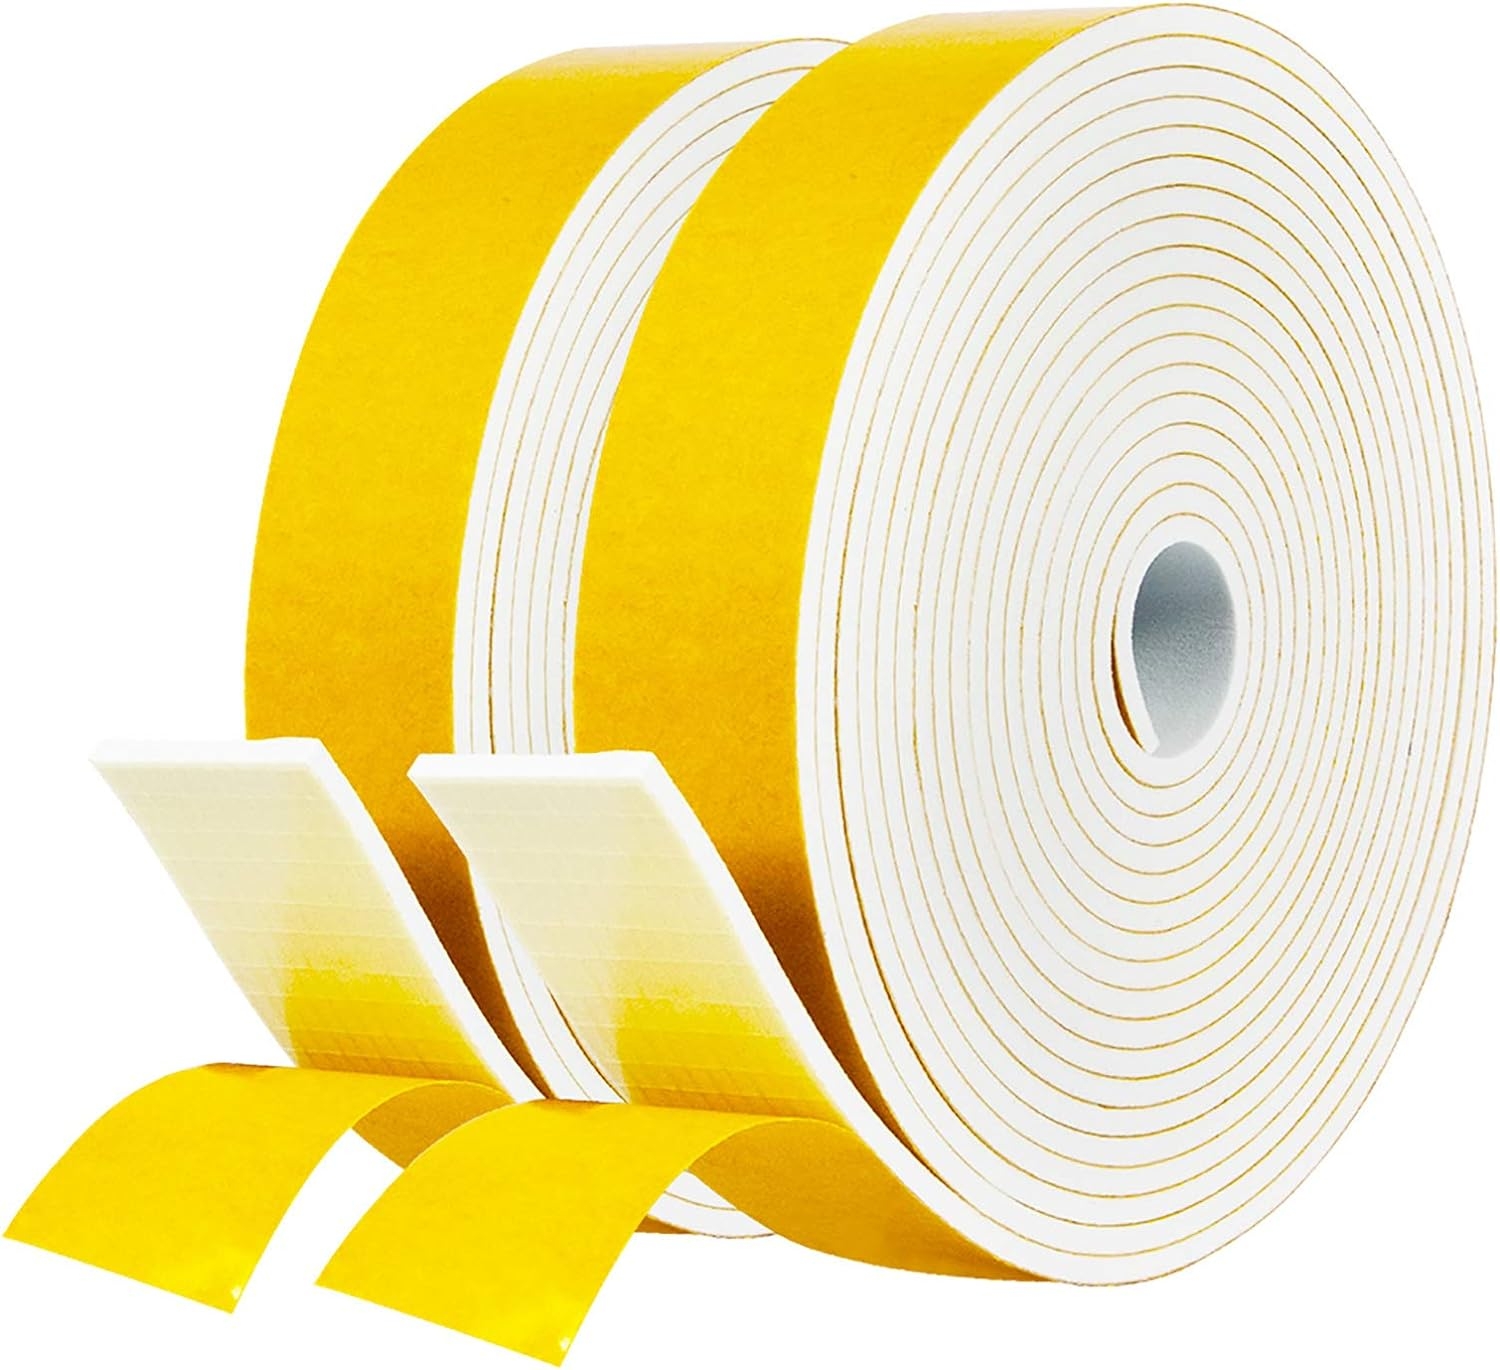 White Foam Sealing Weather Stripping- 2 Rolls, 1 Inch Wide X 1/8 Inch Thick, Window Seal Door Frame Insulation Closed Cell High Density Wide Adhesive Foam Tape, 15 Ft X 2, Total 30 Feet